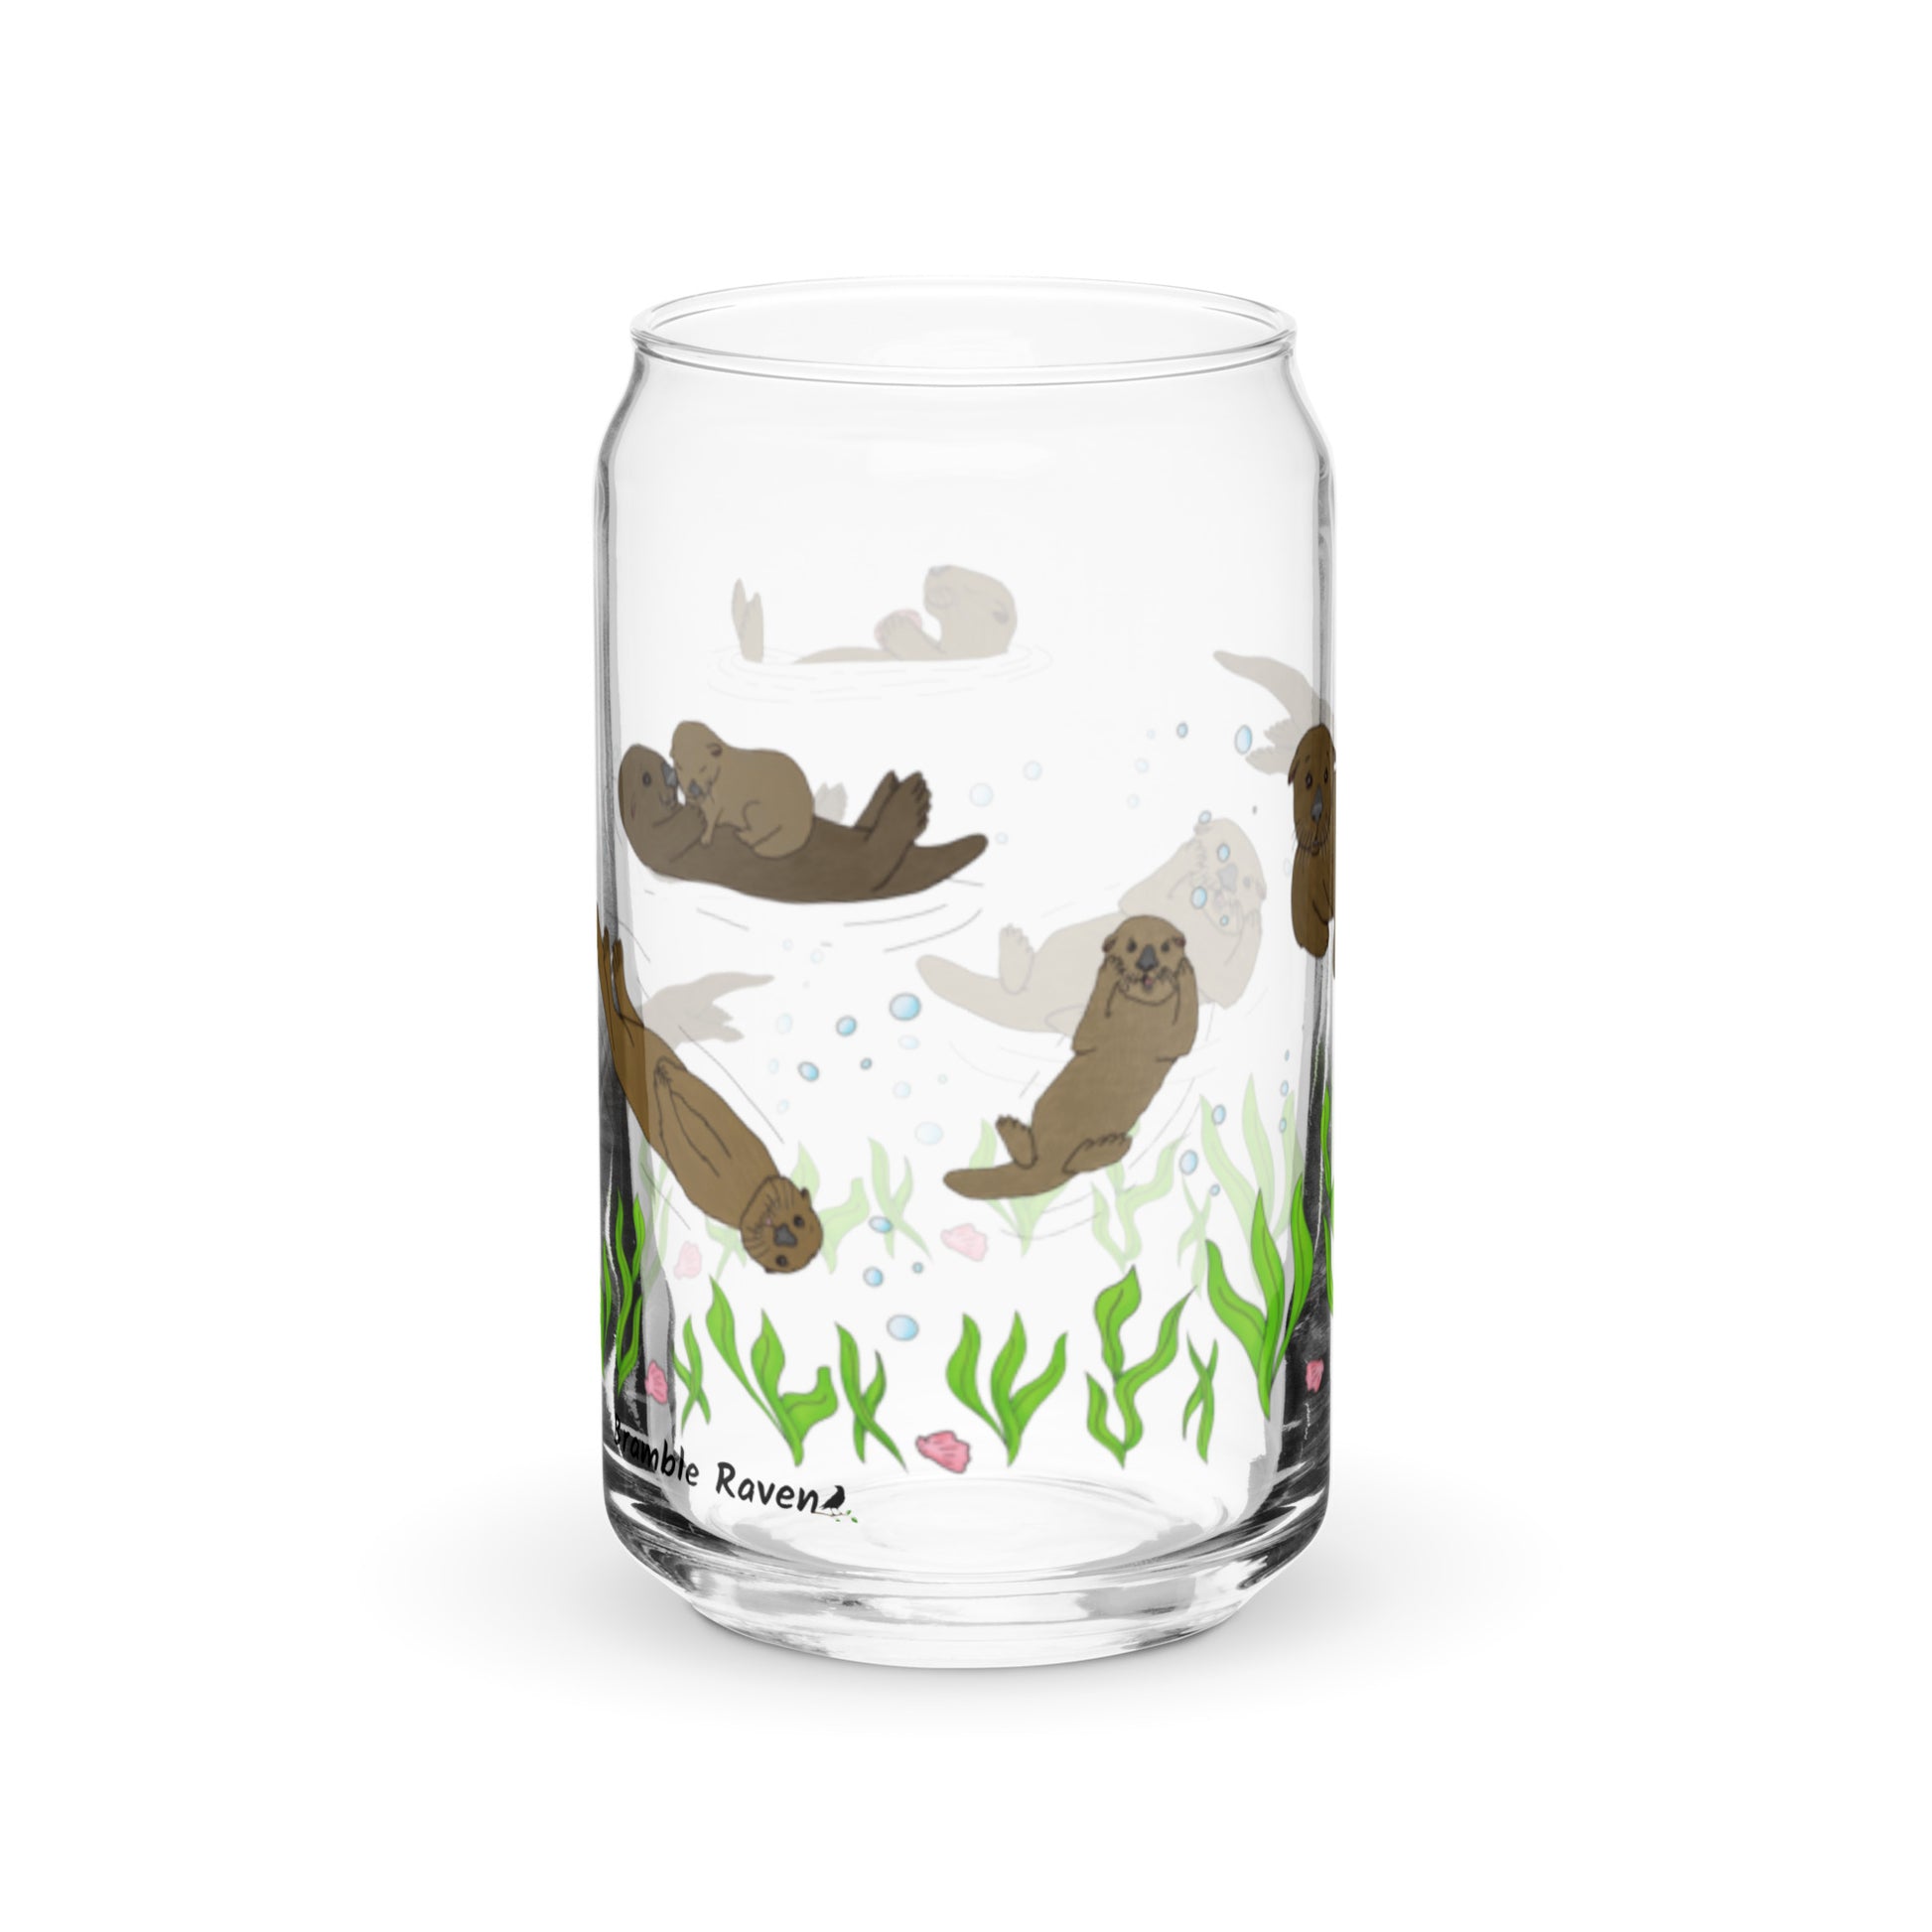 Can-shaped glass holds 16 fluid ounces. Has a design of sea otters swimming above the seaweed with bubble and shell accents. Right side view.